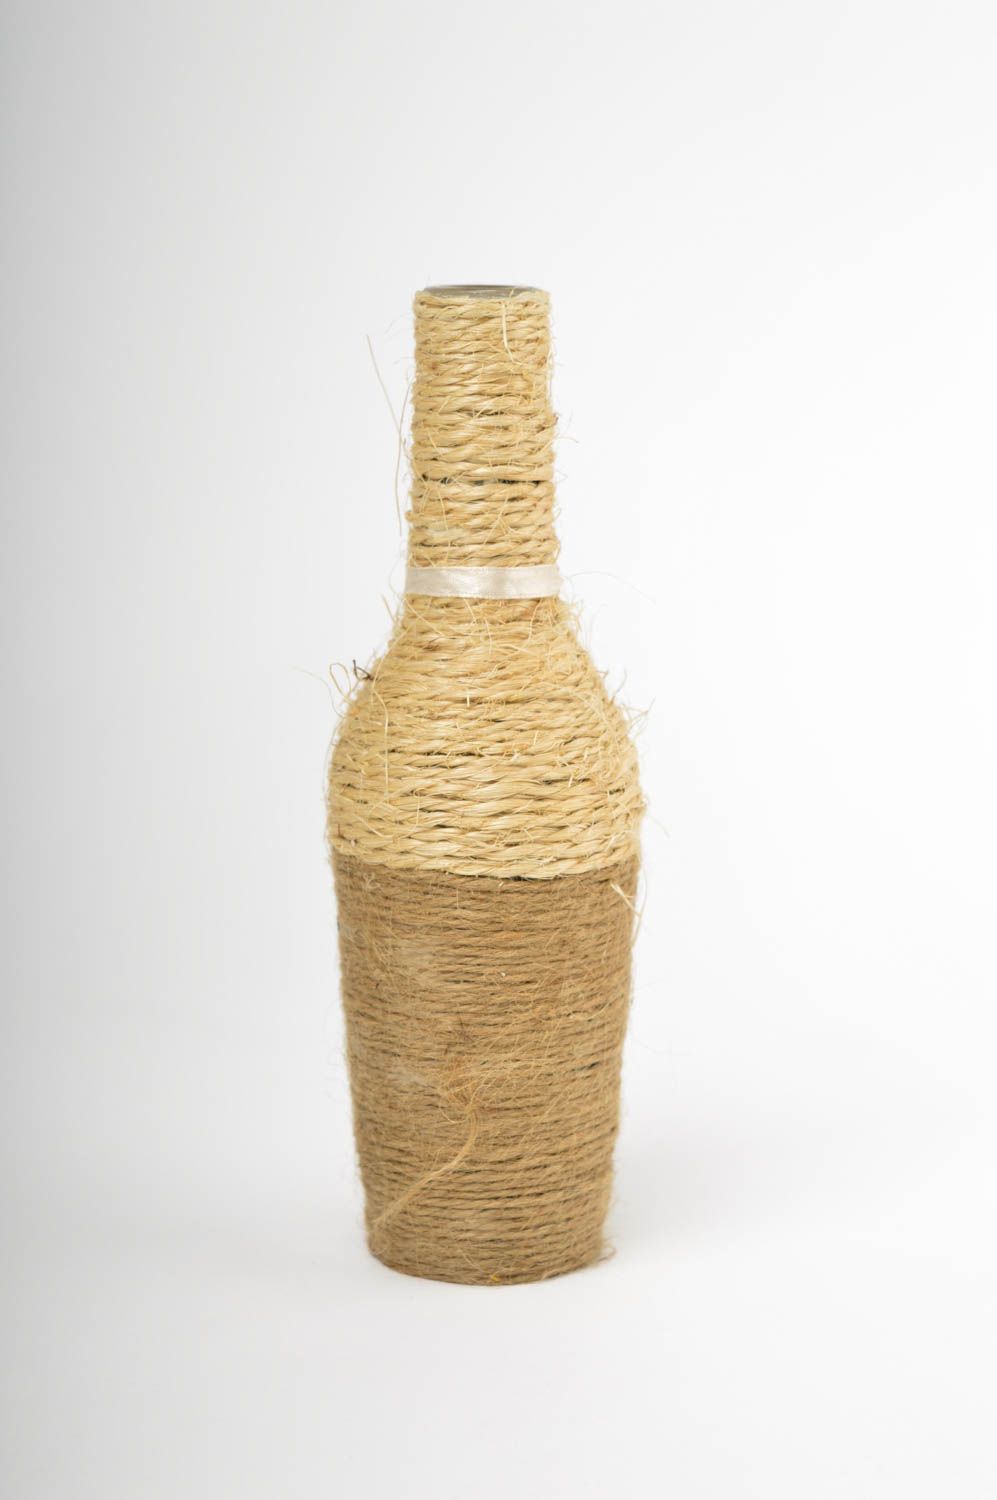 8 inches  glass bottle shape decorated with twine handmade vase 0,56 lb photo 4